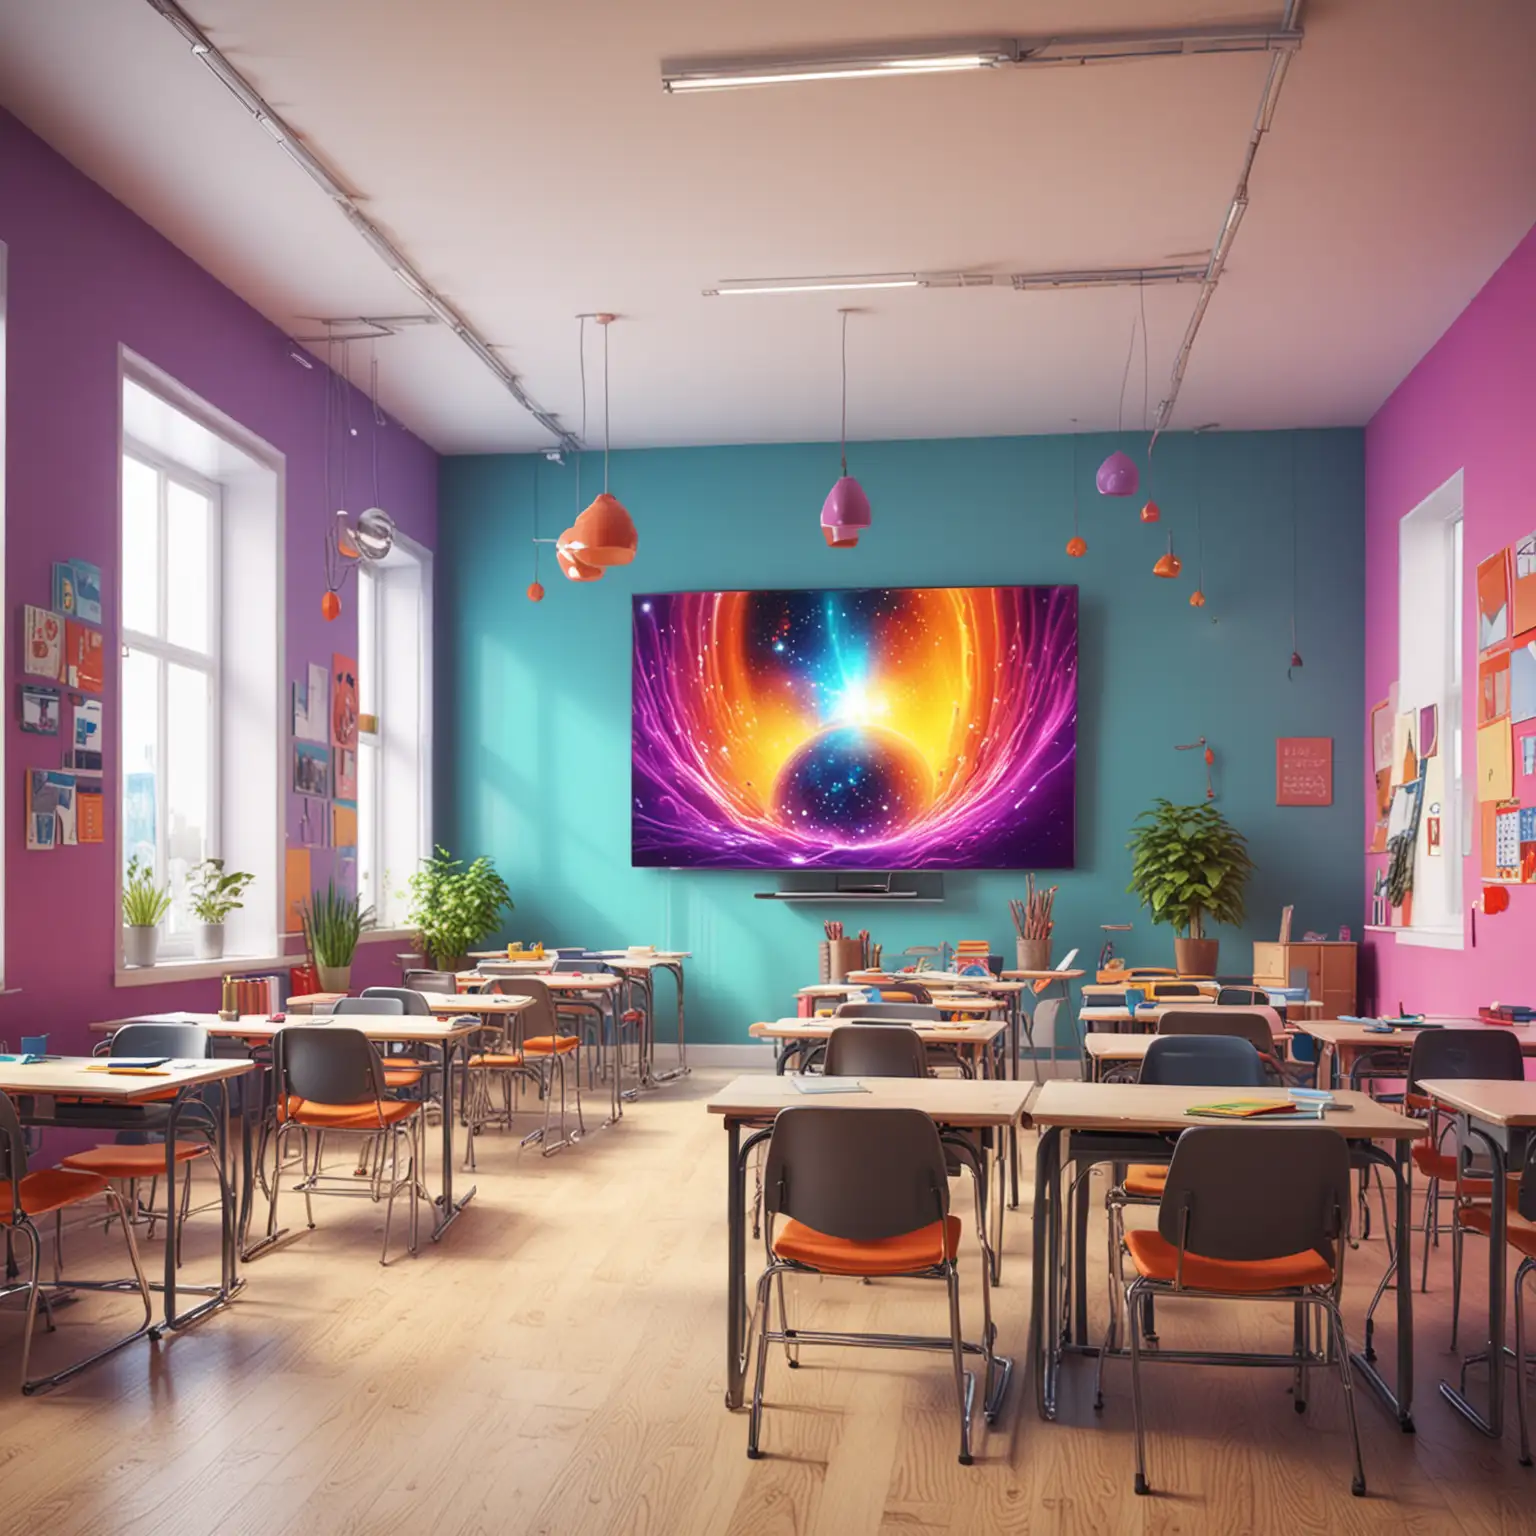 bright classroom with bold vibrants colors. elements a futuristic technology. mood of cheerful --ar--sref: <https://miramuseai.net/record/151056->